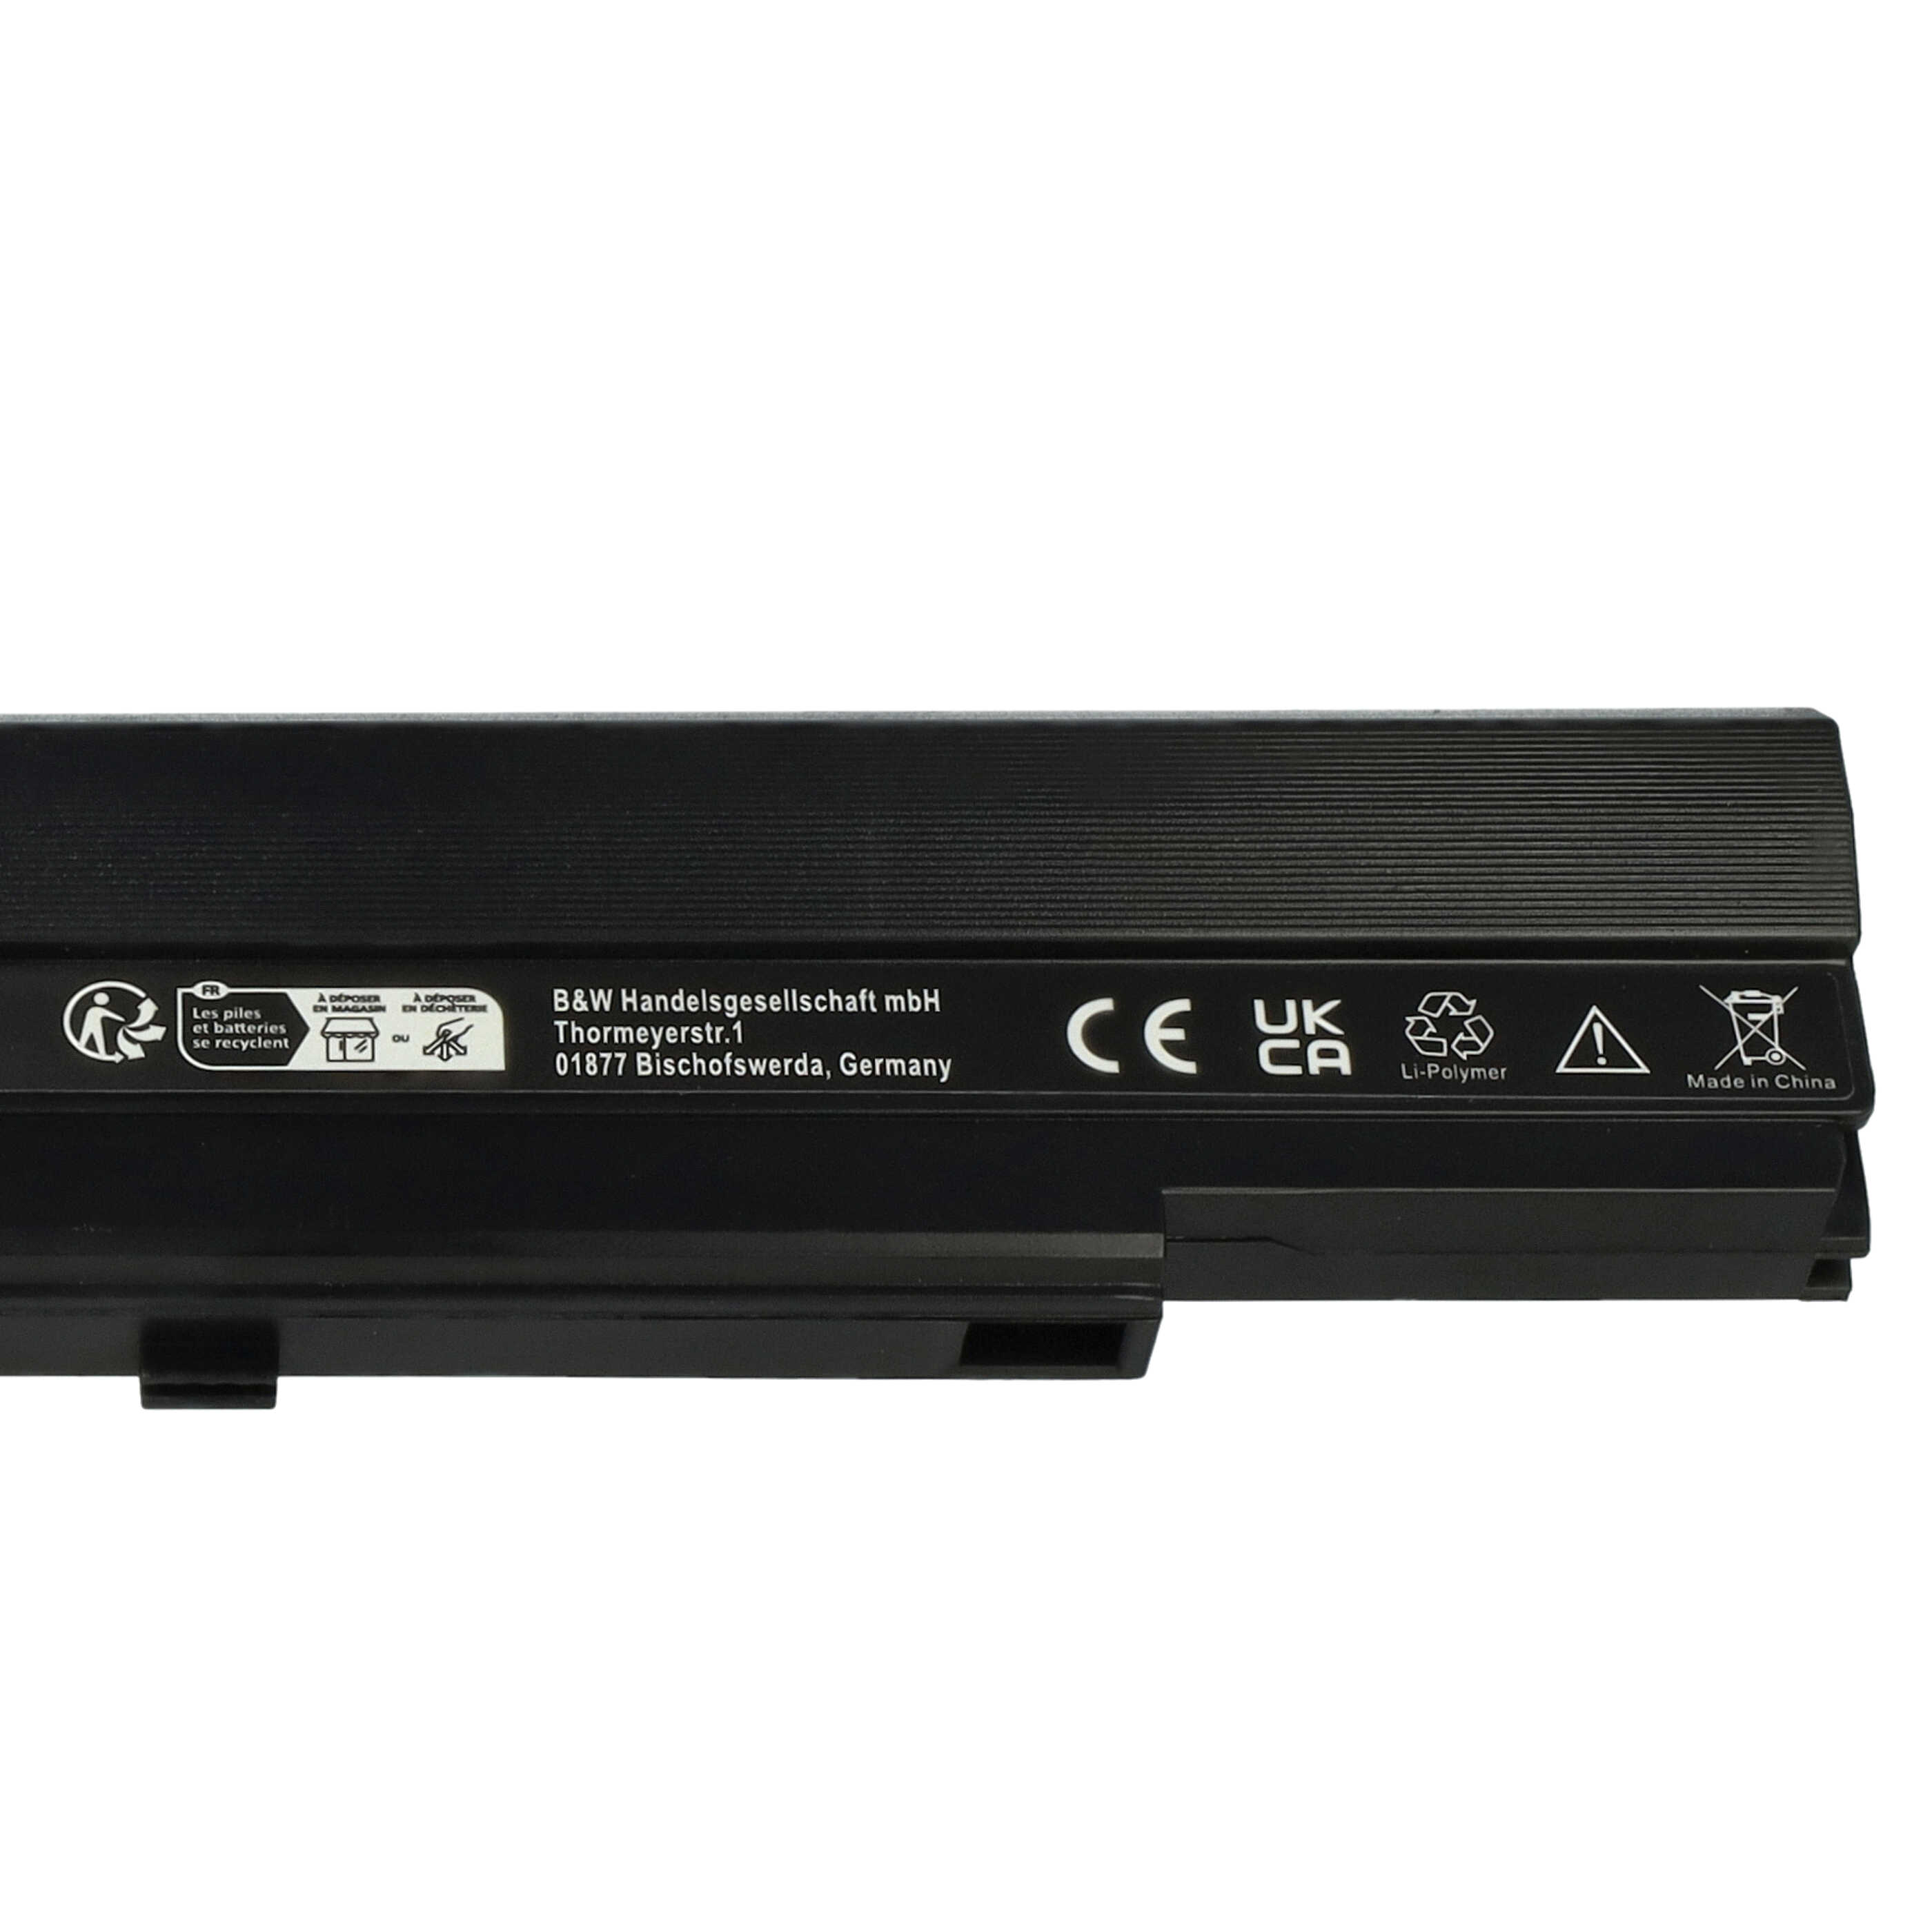 Notebook Battery Replacement for Asus A42-UL50, A42-UL30, A42-UL80, A31-UL30 - 6600mAh 14.8V Li-Ion, black